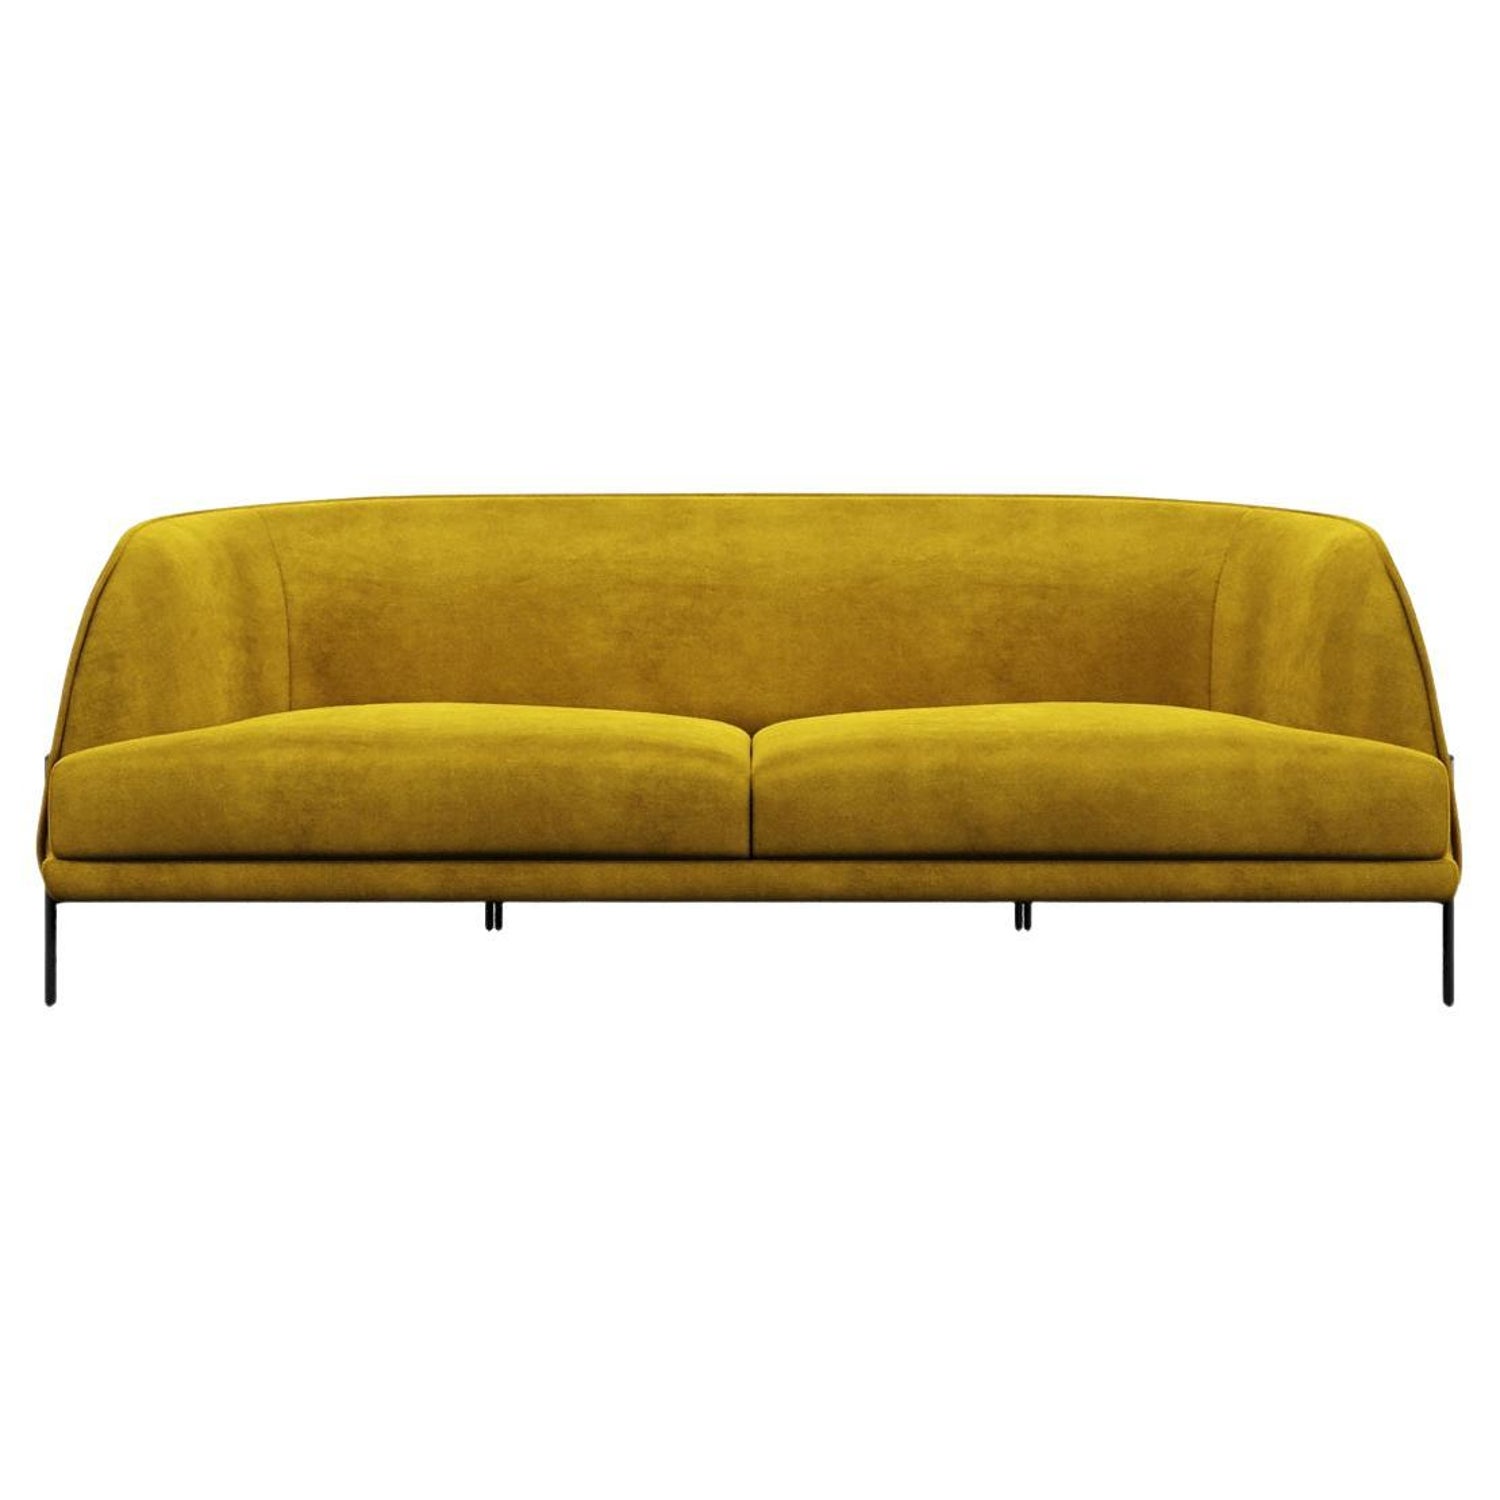 Caillou, 3 Seater Sofa, Fabric: Xray 39, by Liujo Living For Sale at 1stDibs